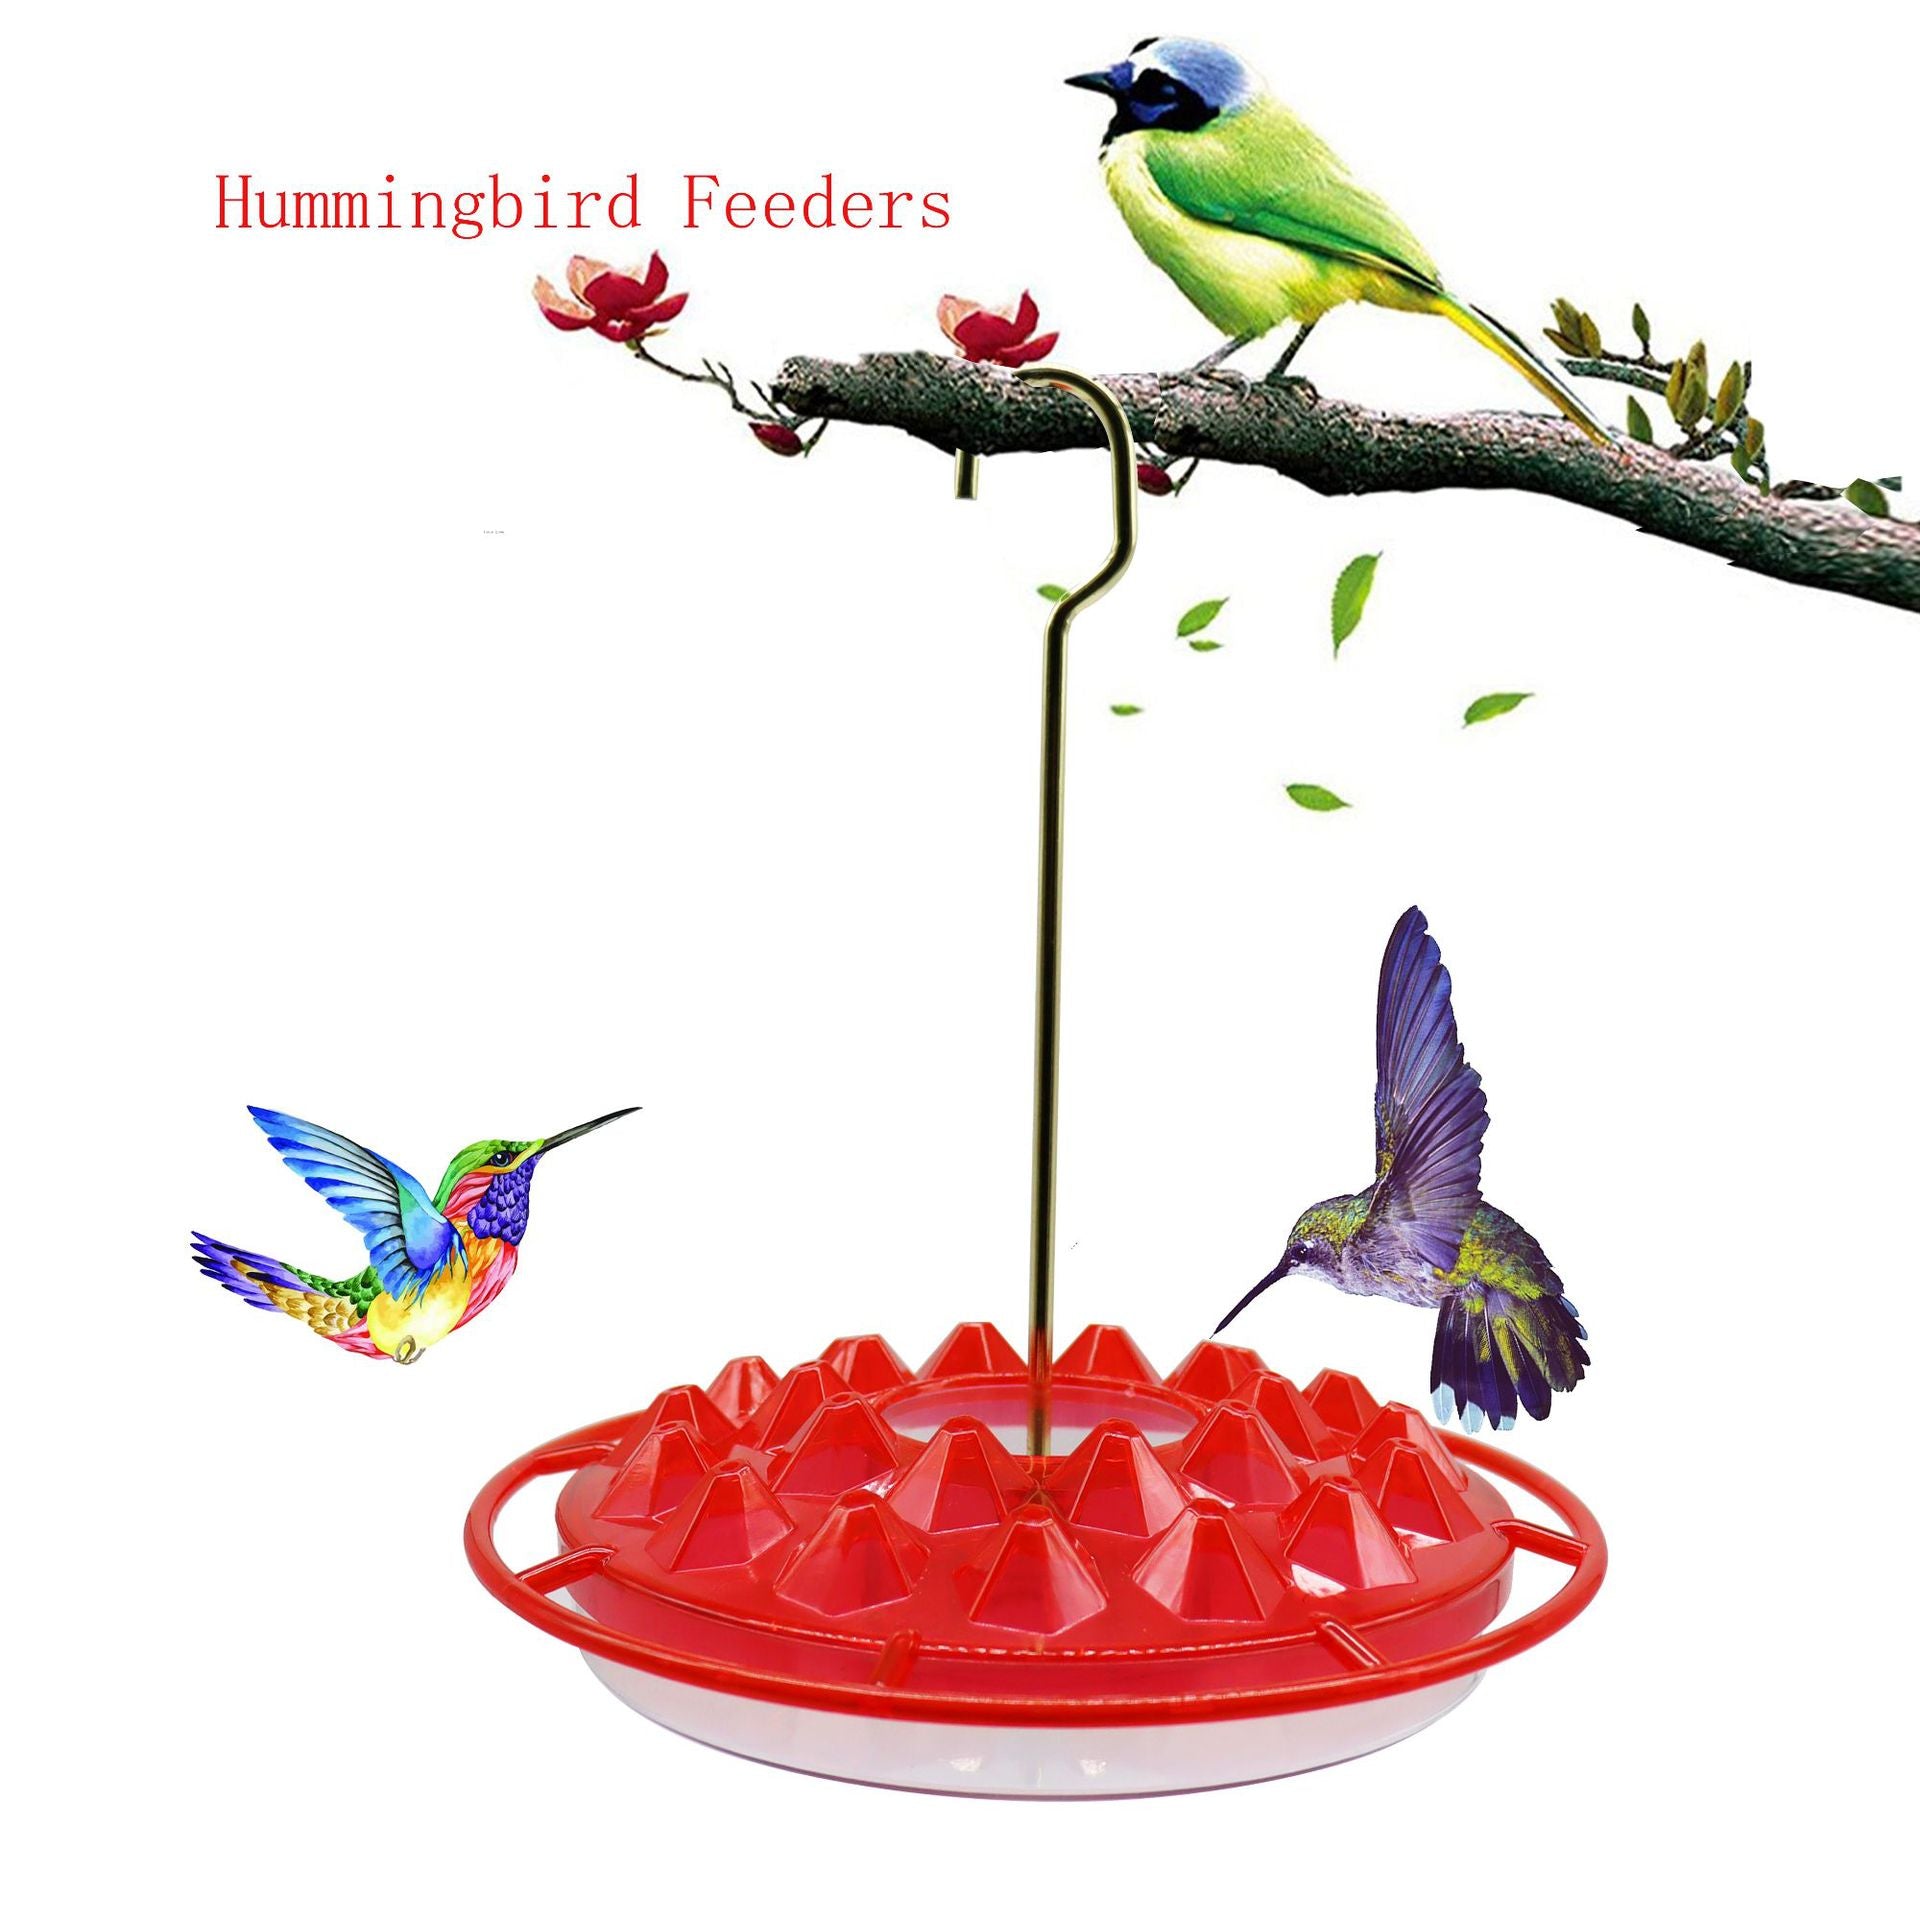 Hummingbird Feeder with Resting Bar and Ant Mote Perfect for your Hummingbird friends..